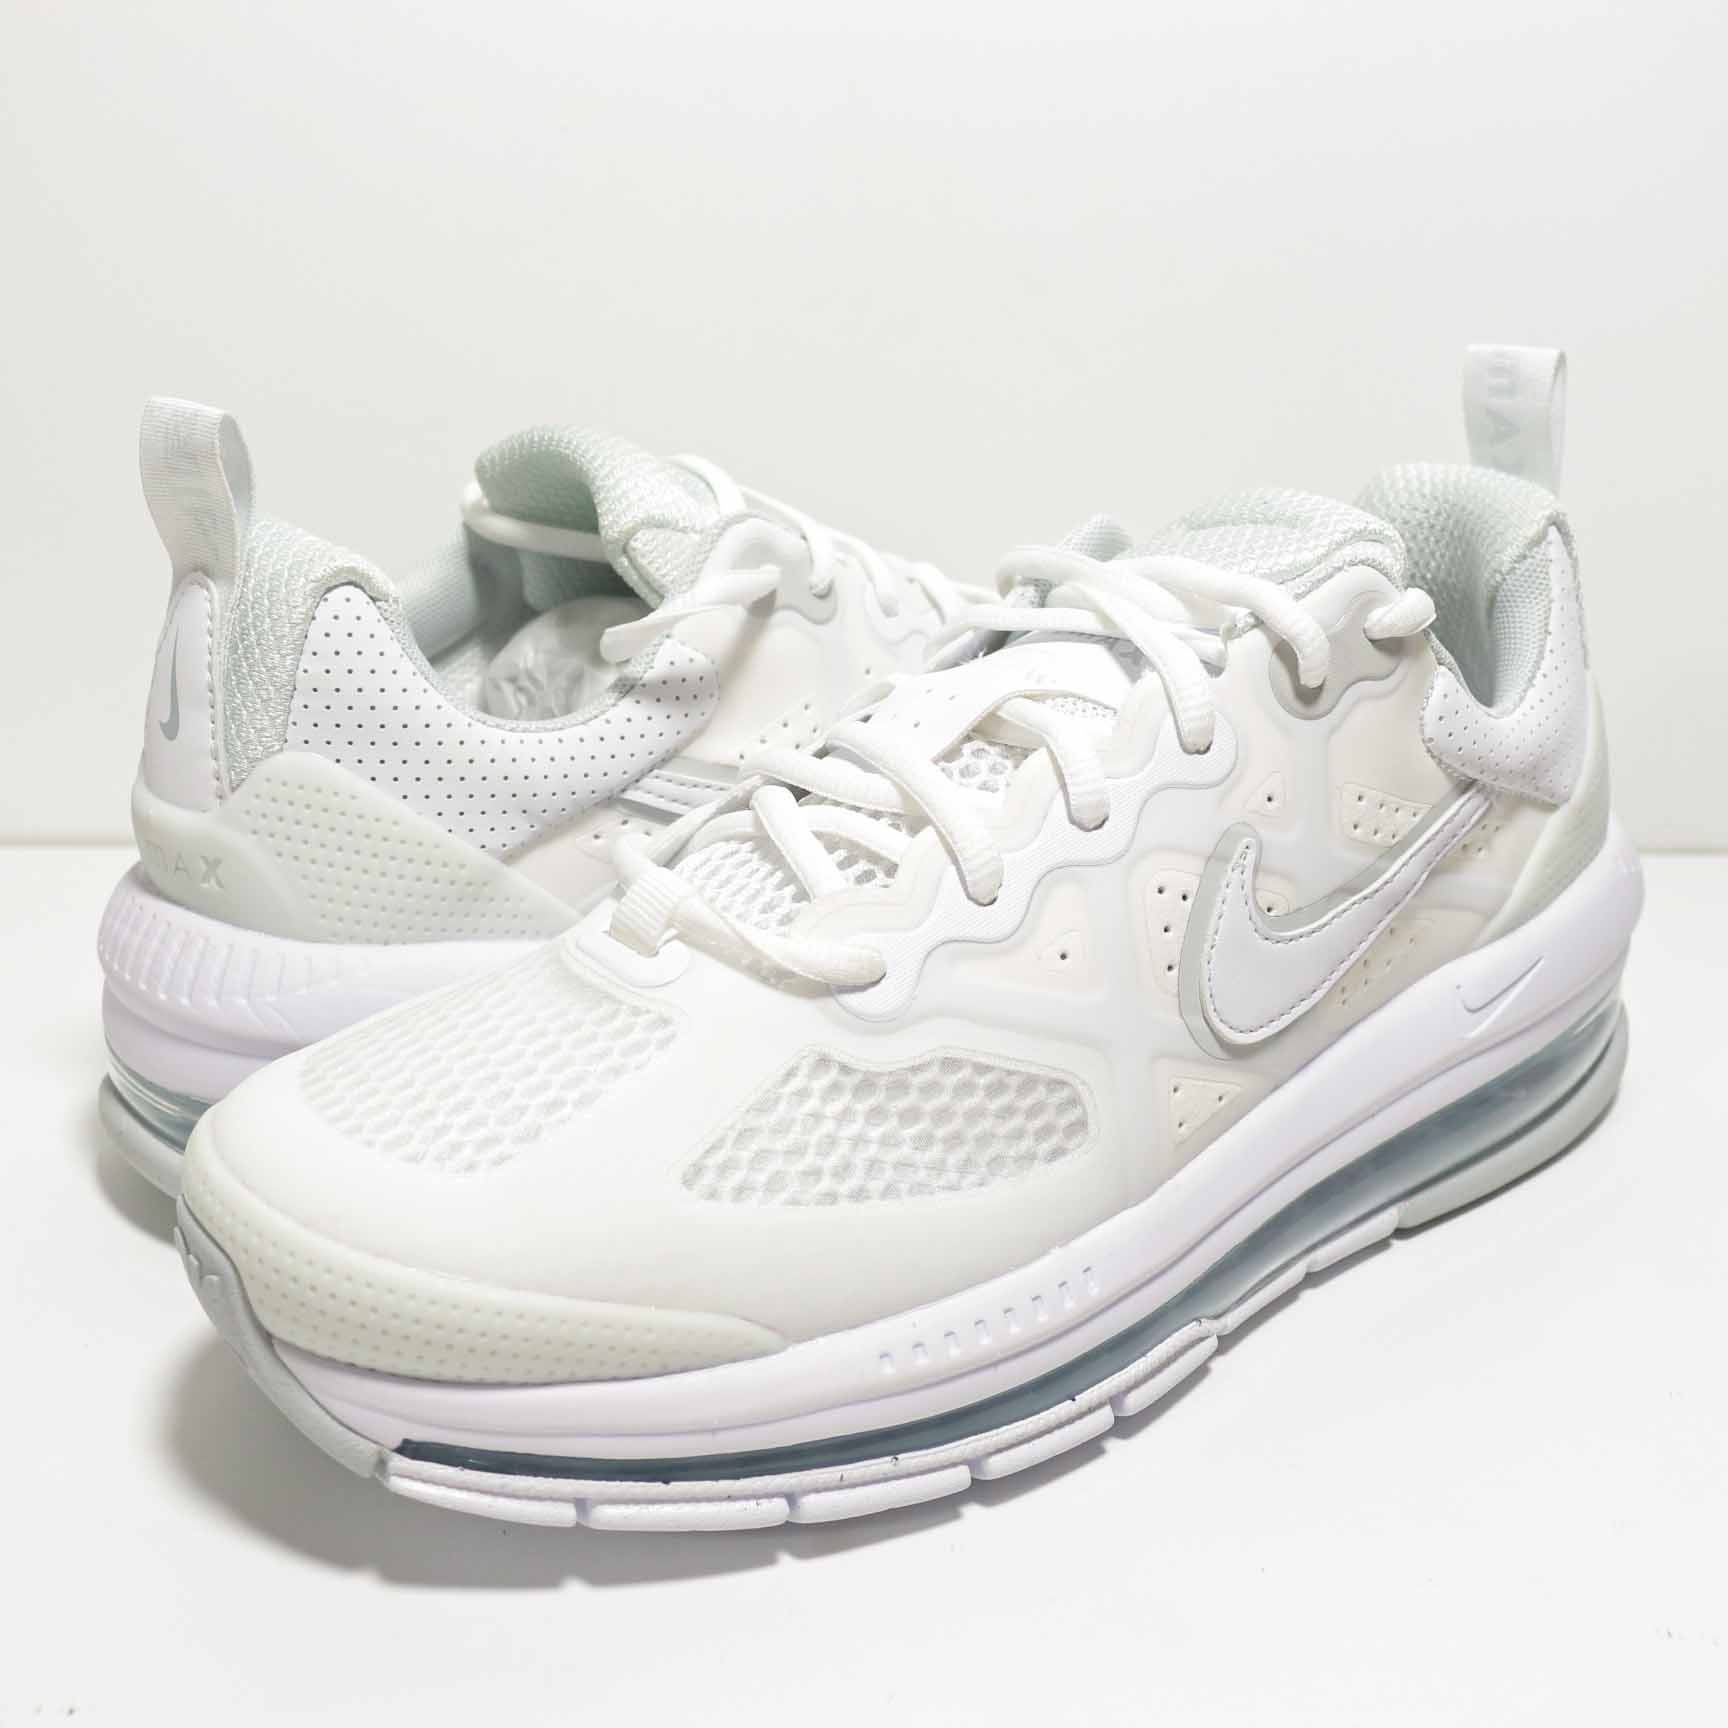 Nike Air Max Genome Pure White Shoes